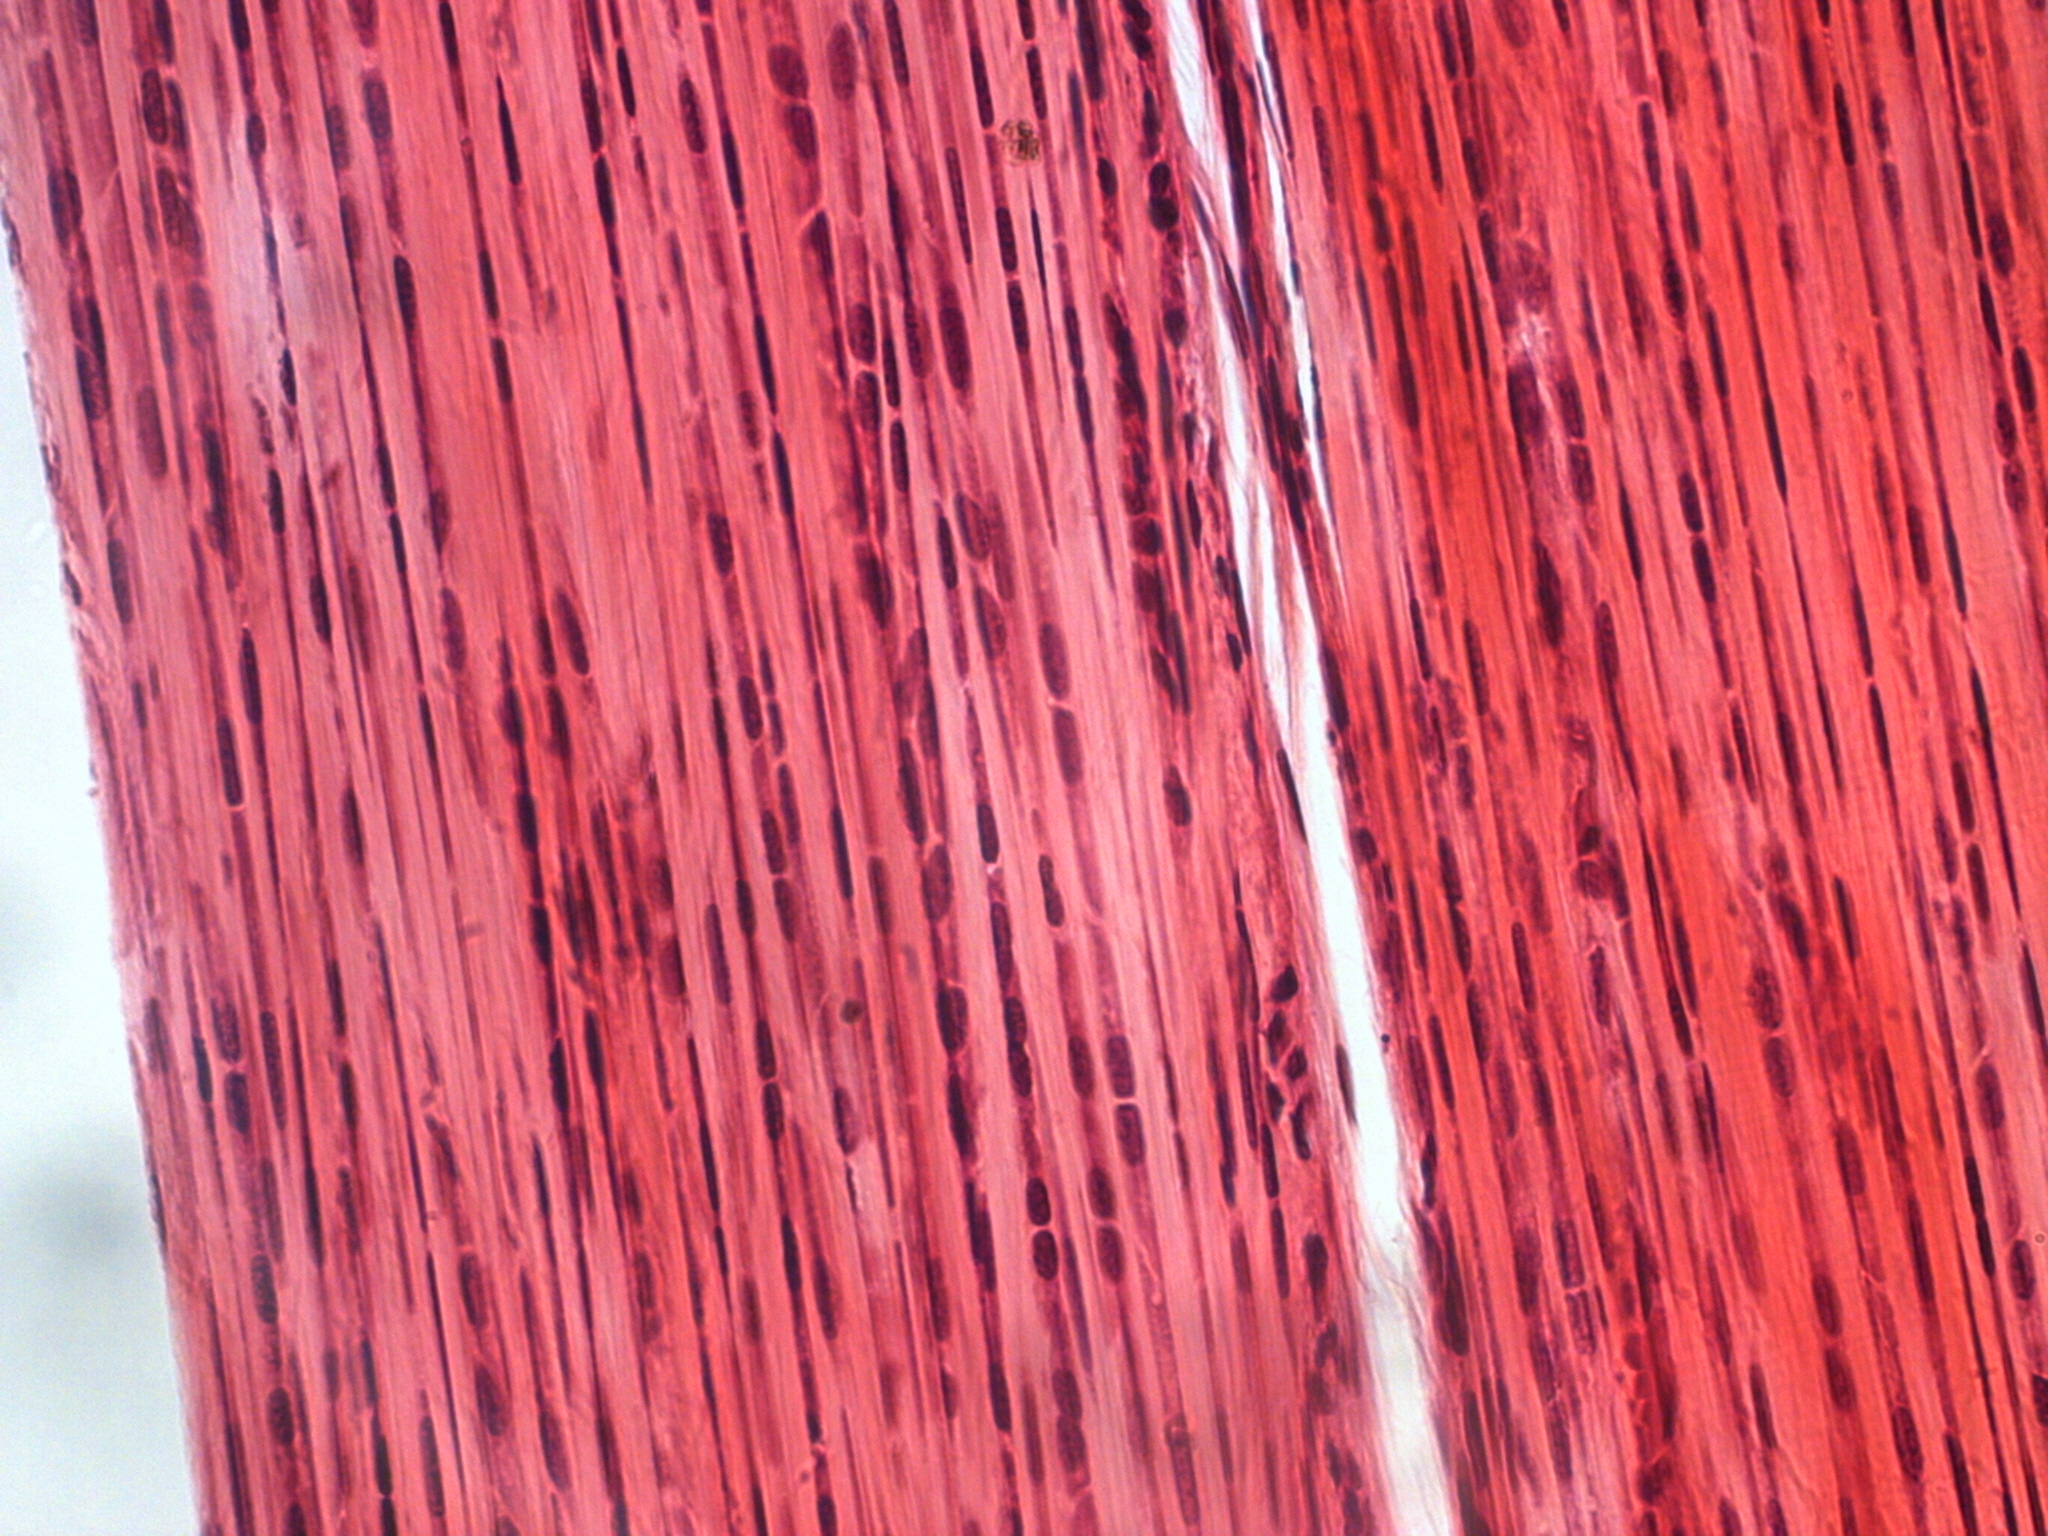 Connective and epithelial tissue